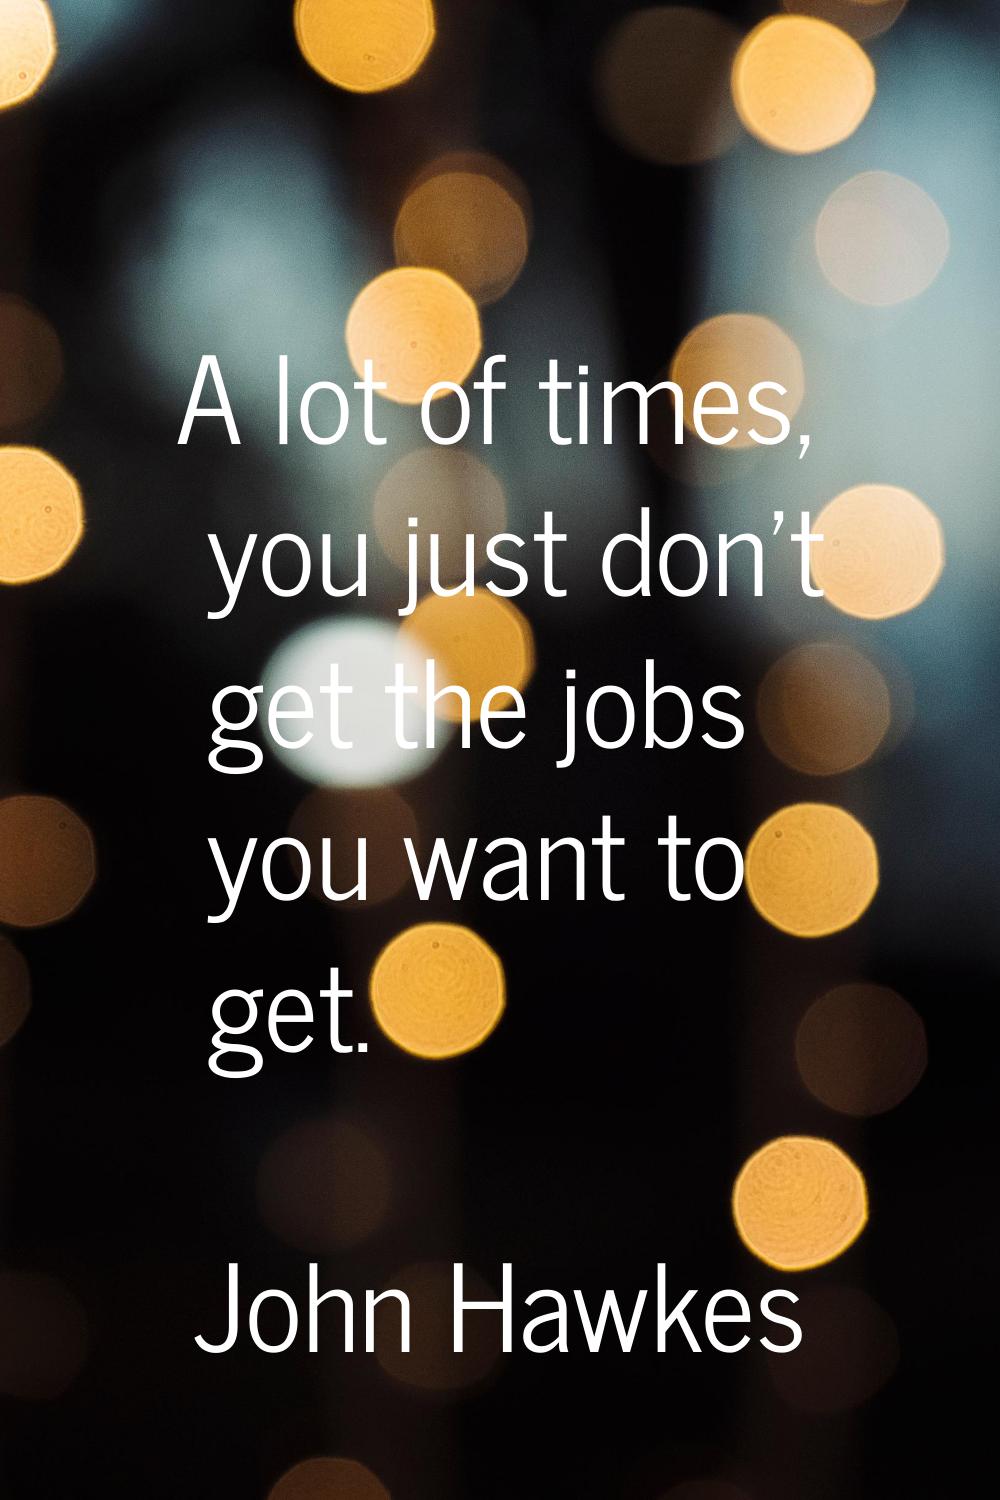 A lot of times, you just don't get the jobs you want to get.